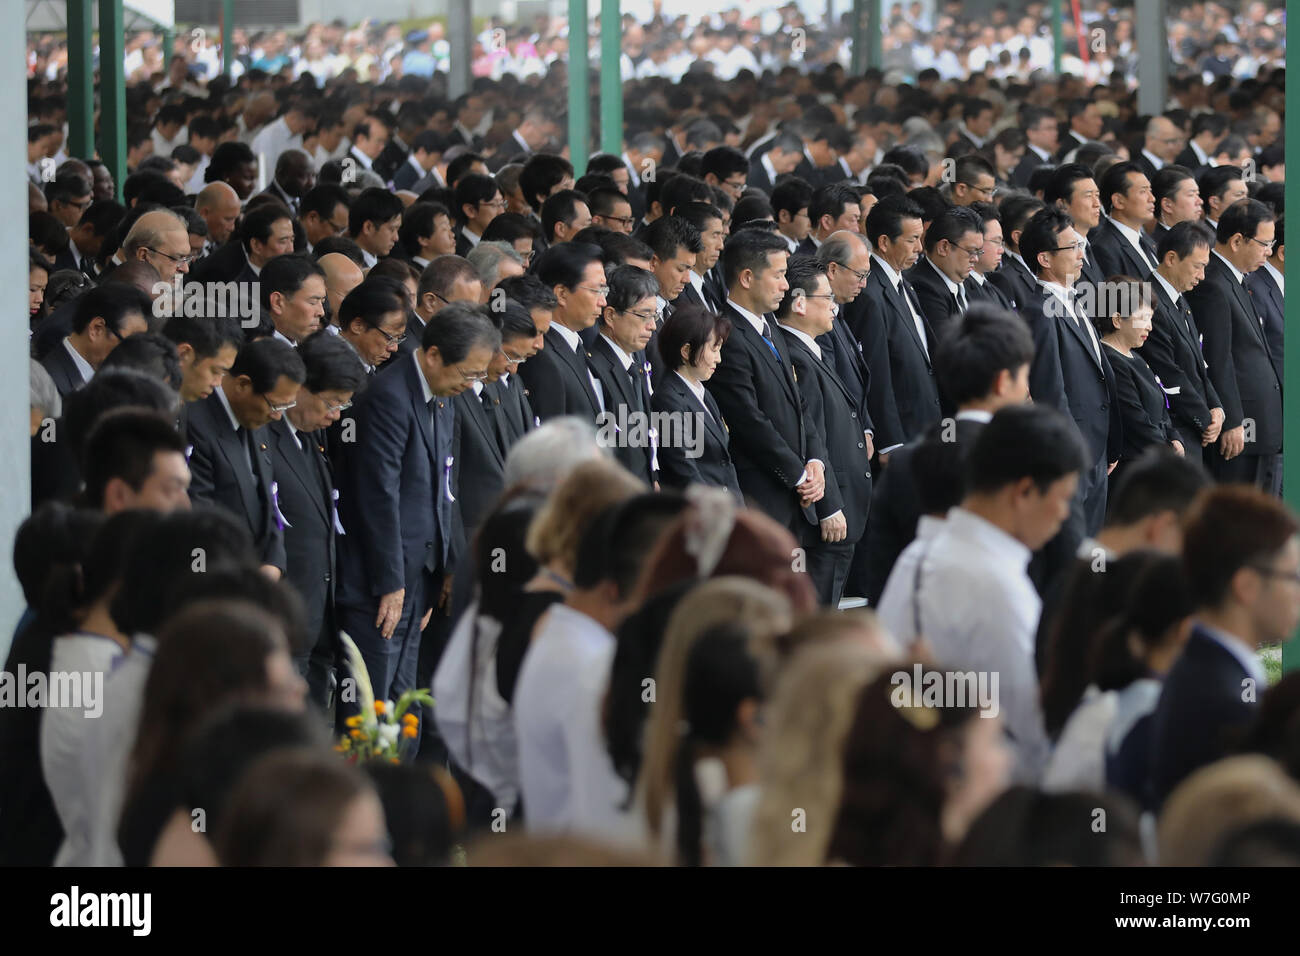 Hiroshima, Japan. 6th Aug, 2019. People attend an annual memorial ceremony in Hiroshima, Japan, Aug. 6, 2019. Hiroshima, a Japanese city hit by a U.S. atomic bomb at the end of World War II, marked the 74th anniversary of the bombing on Tuesday. Credit: Du Xiaoyi/Xinhua/Alamy Live News Stock Photo